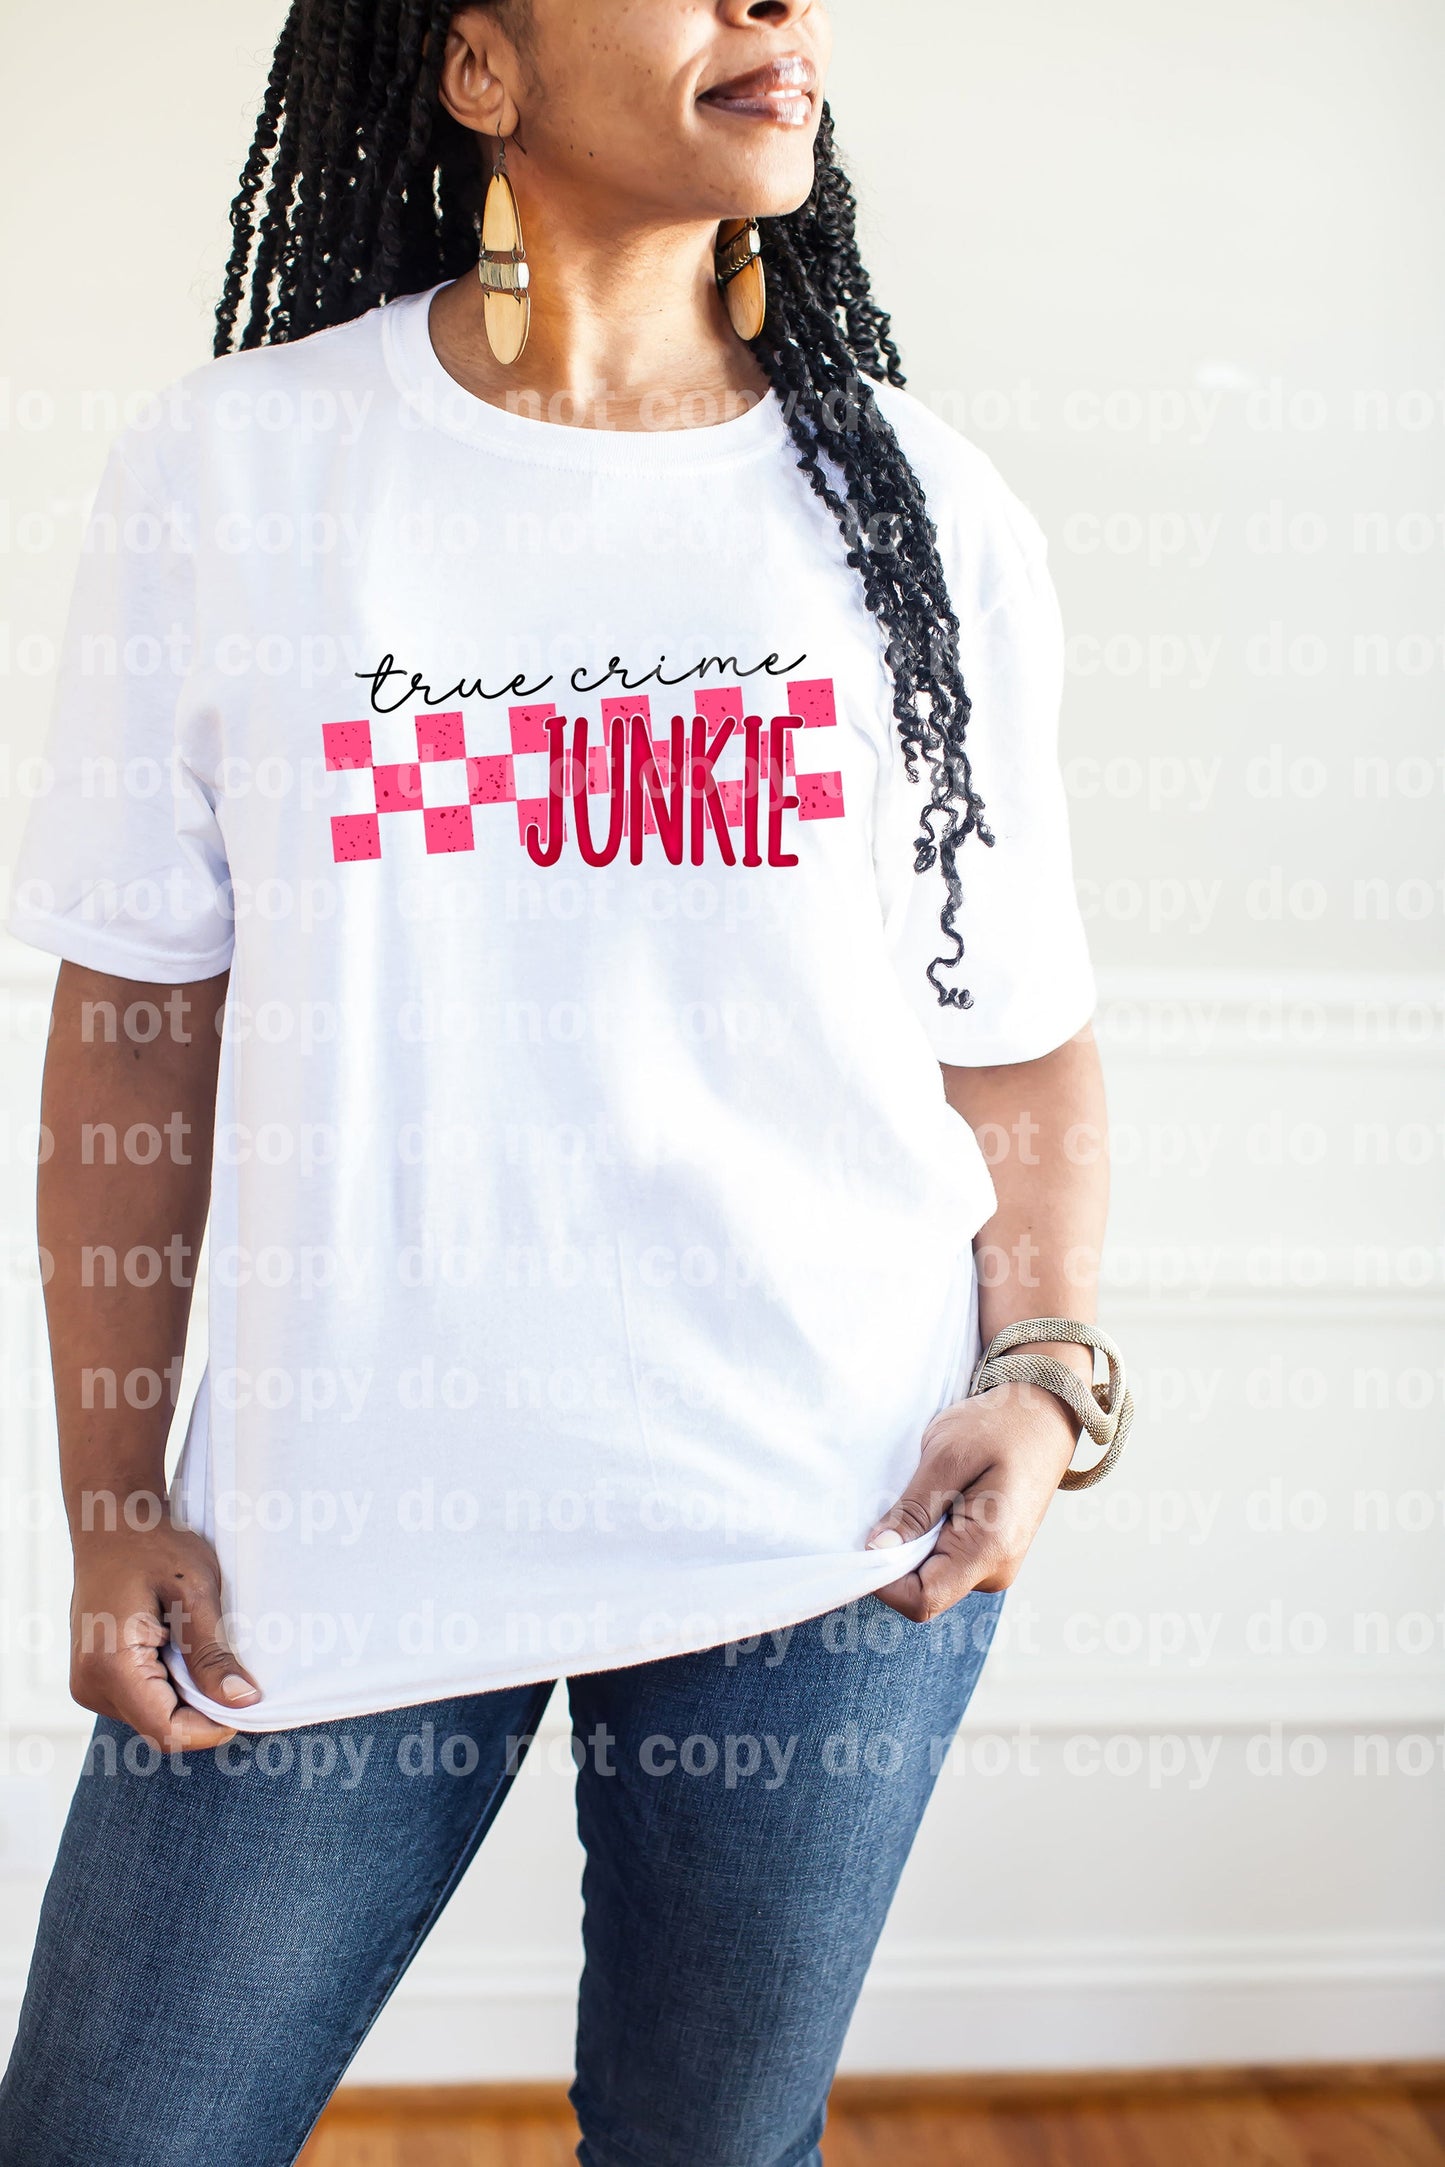 True Crime Junkie Checkered Pink Dream Print or Sublimation Print